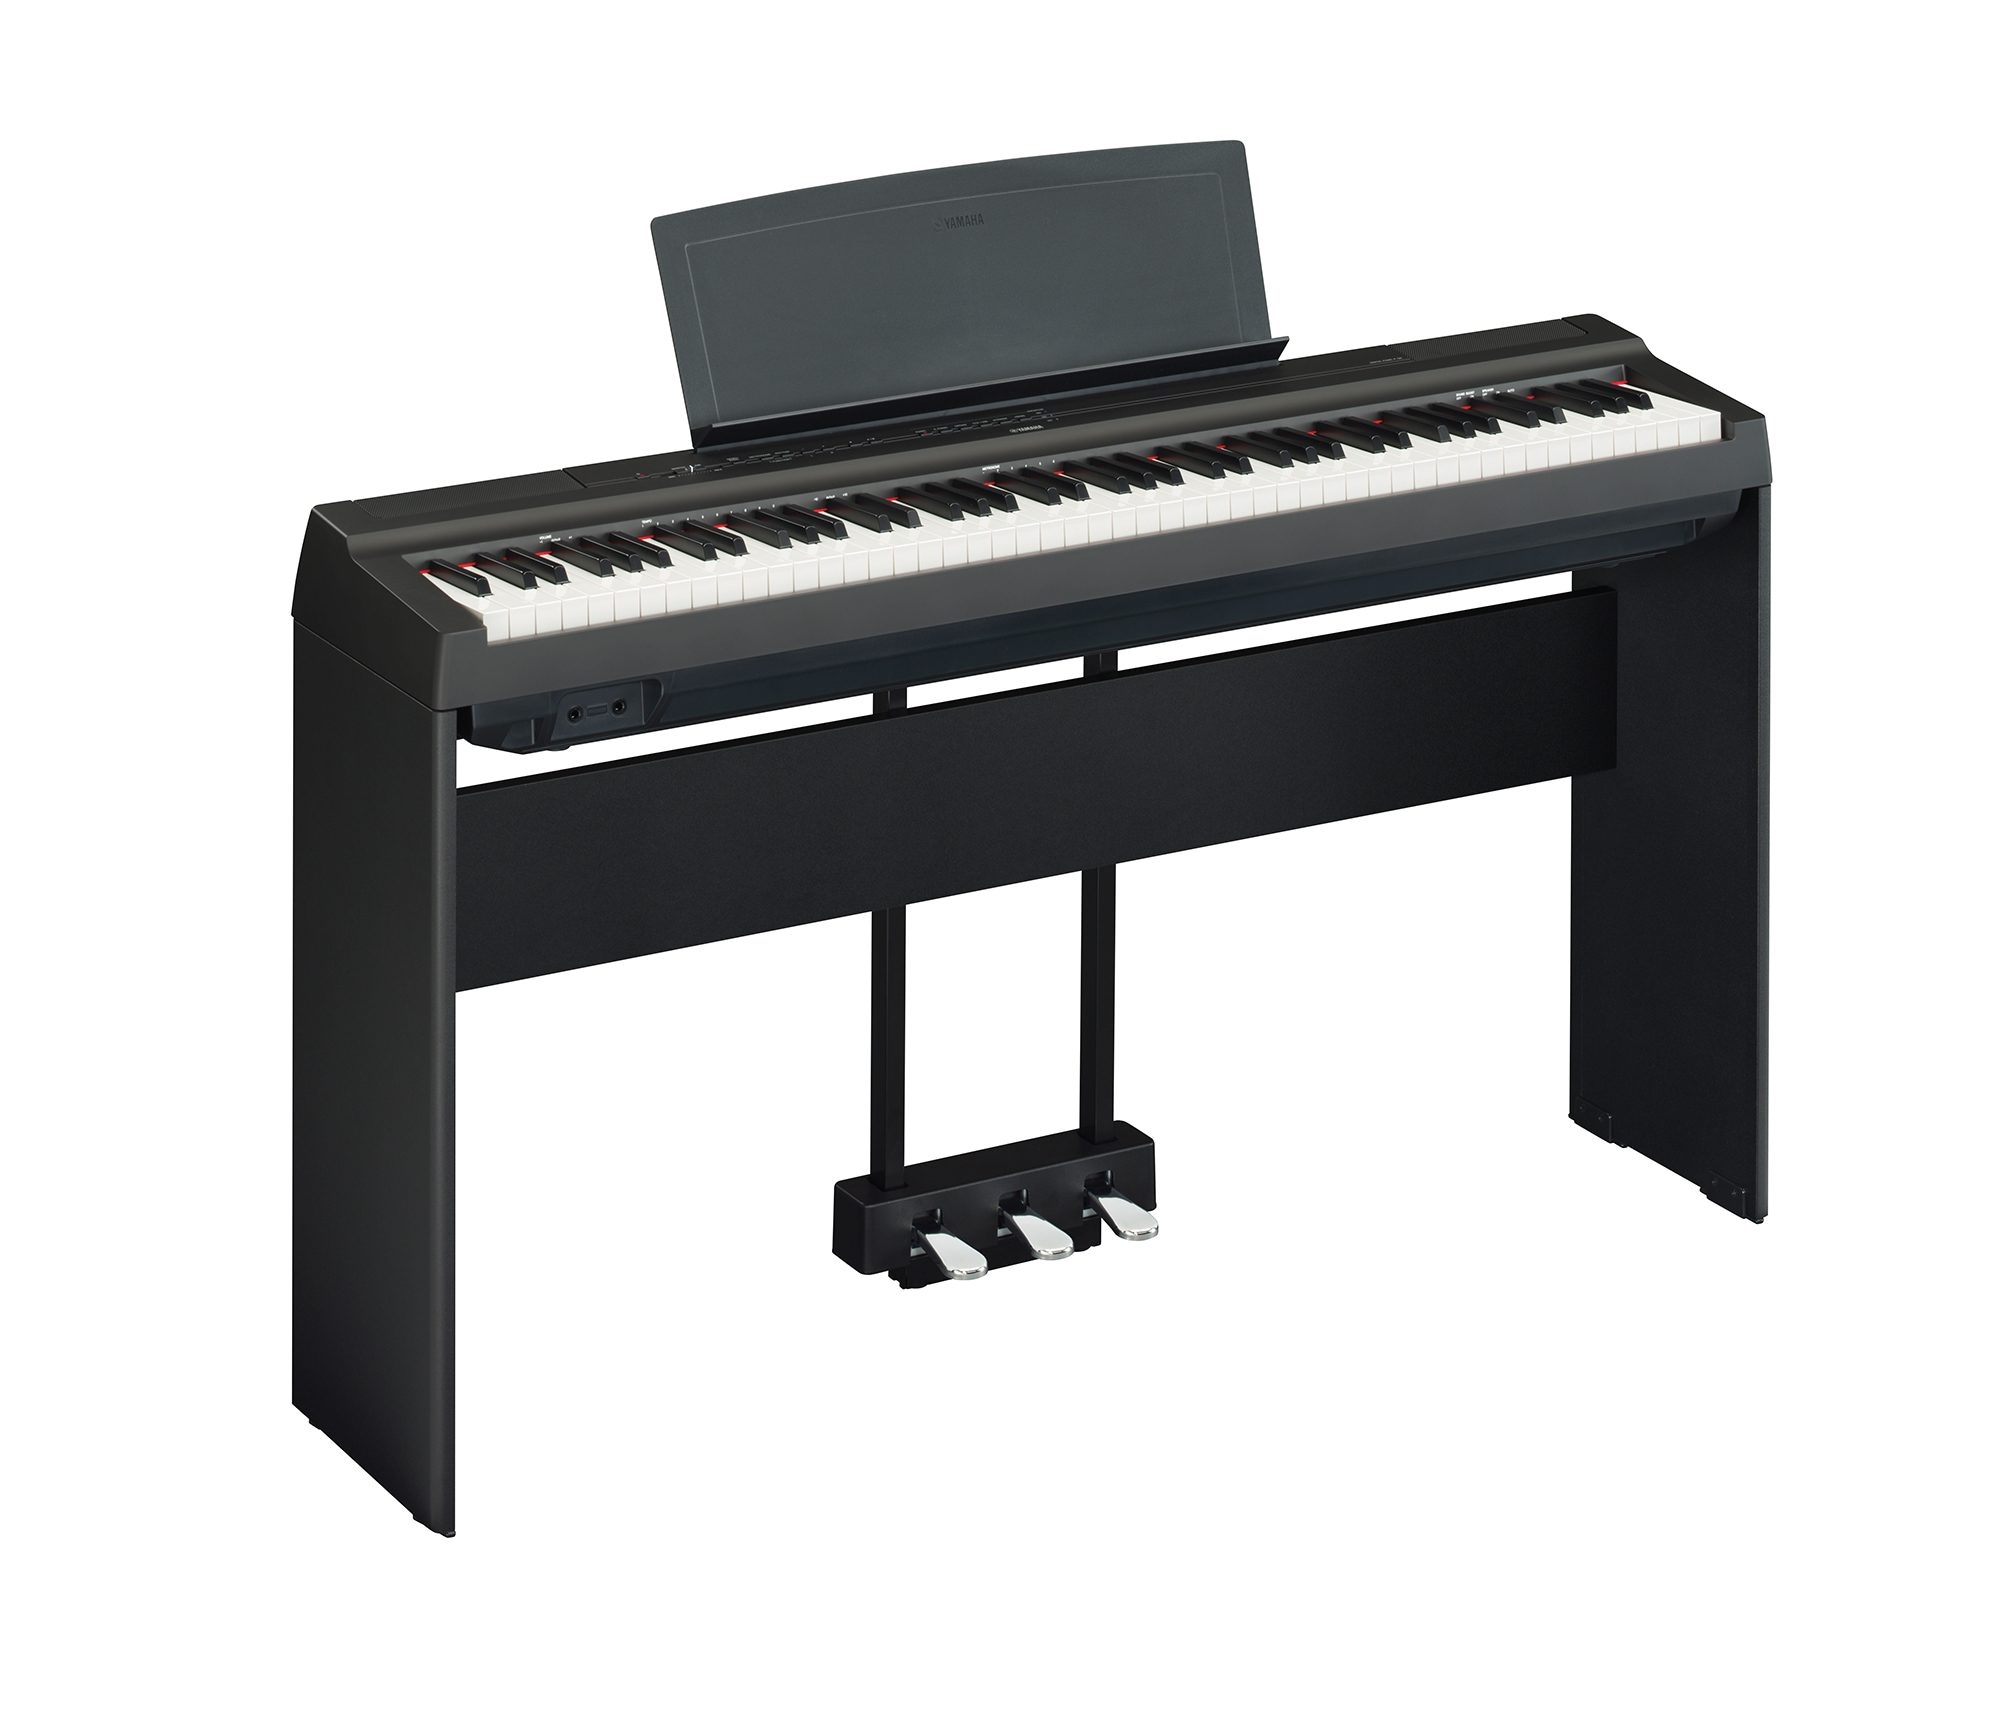 P-125 - Overview - Portables - Pianos - Musical Instruments 